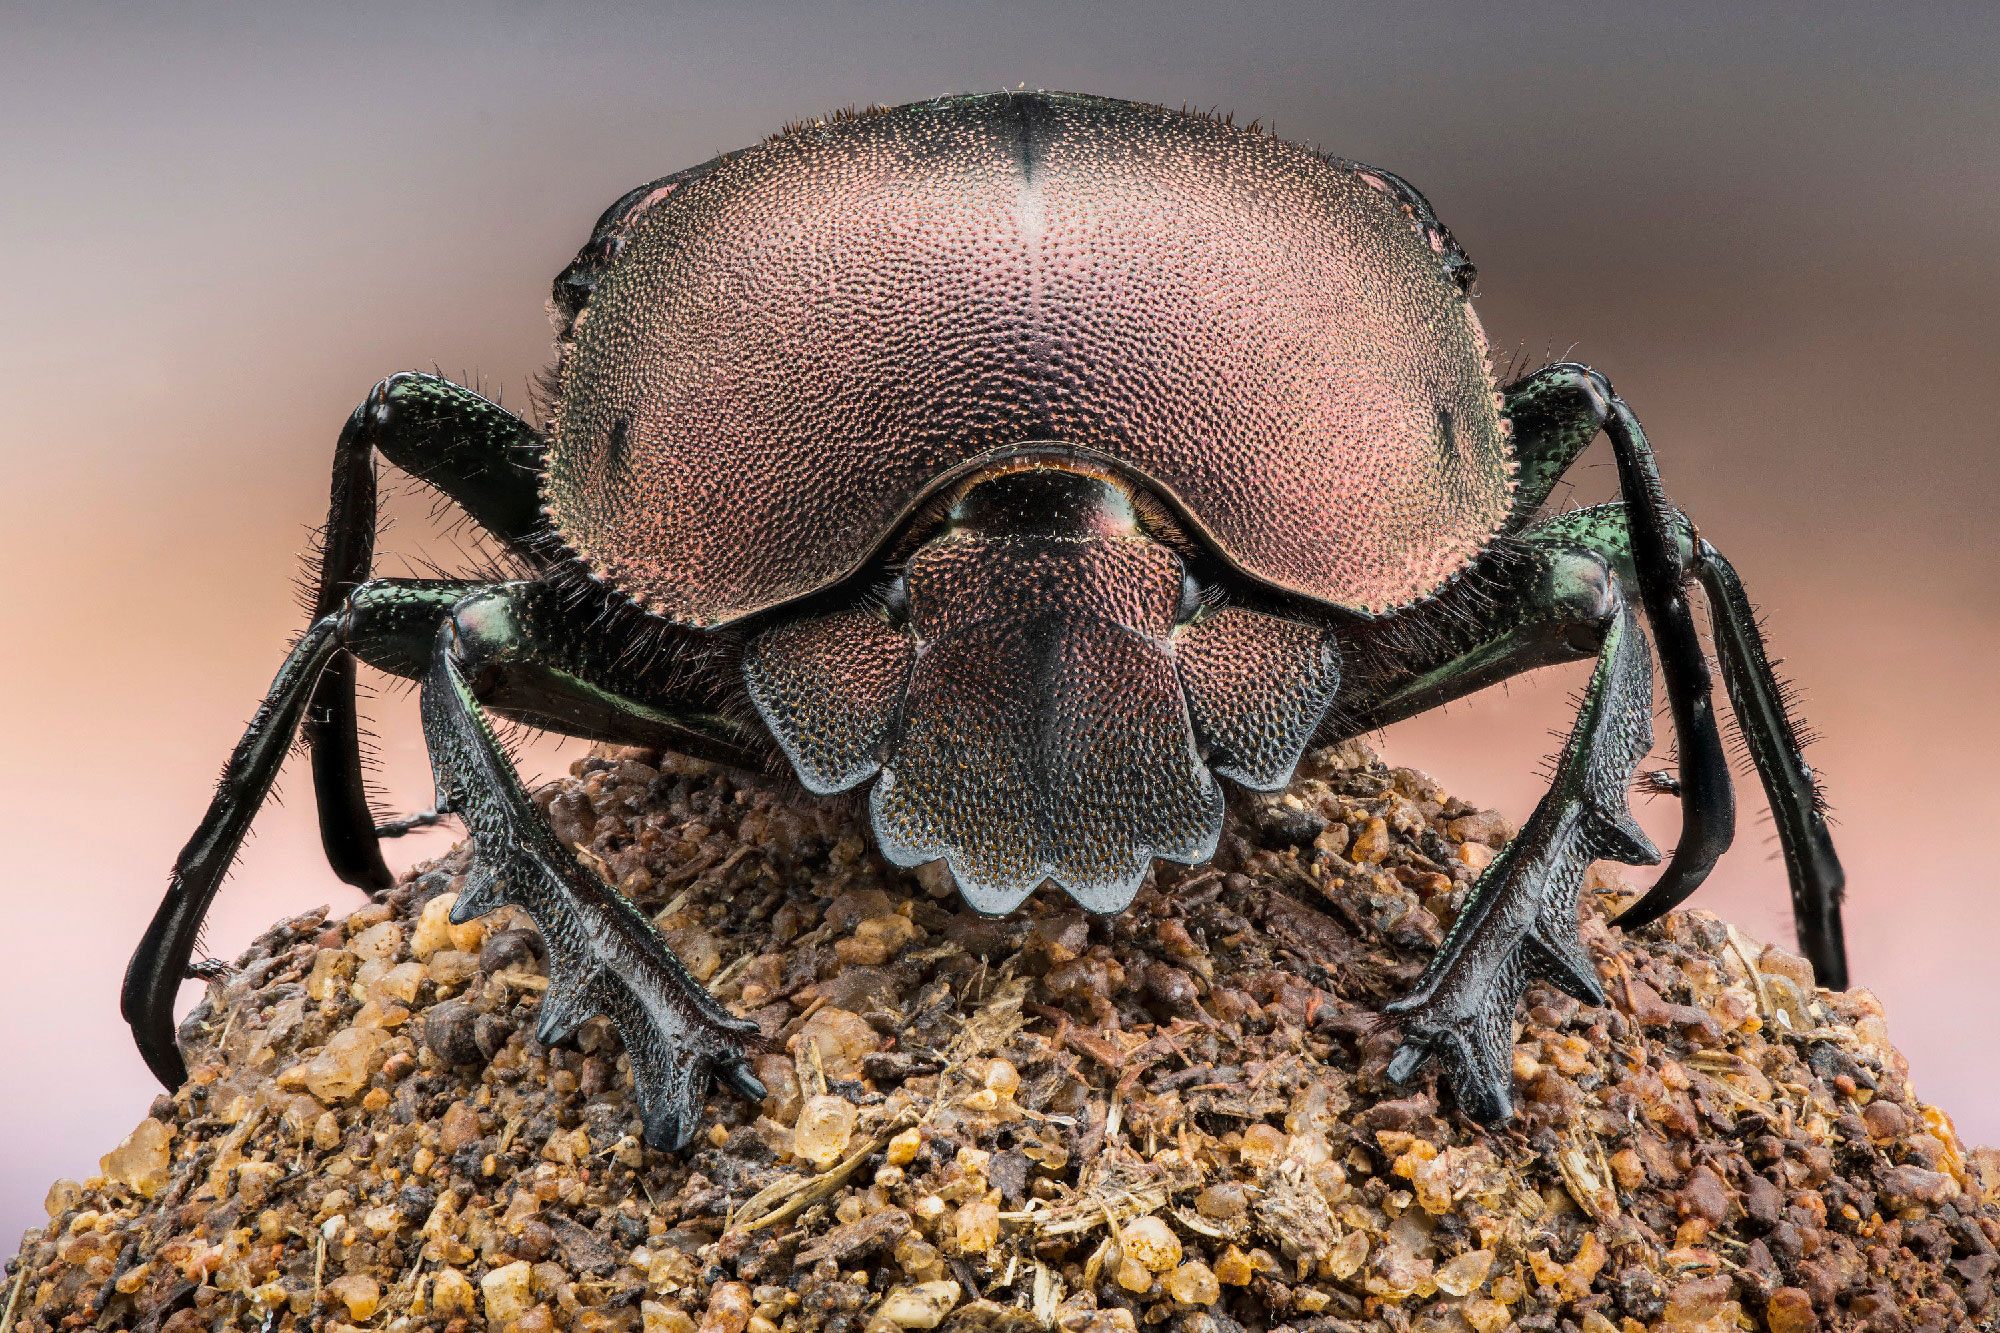 An extreme close-up of a dung beetle as featured in Disney's 'A Real Bug's Life' documentary series.